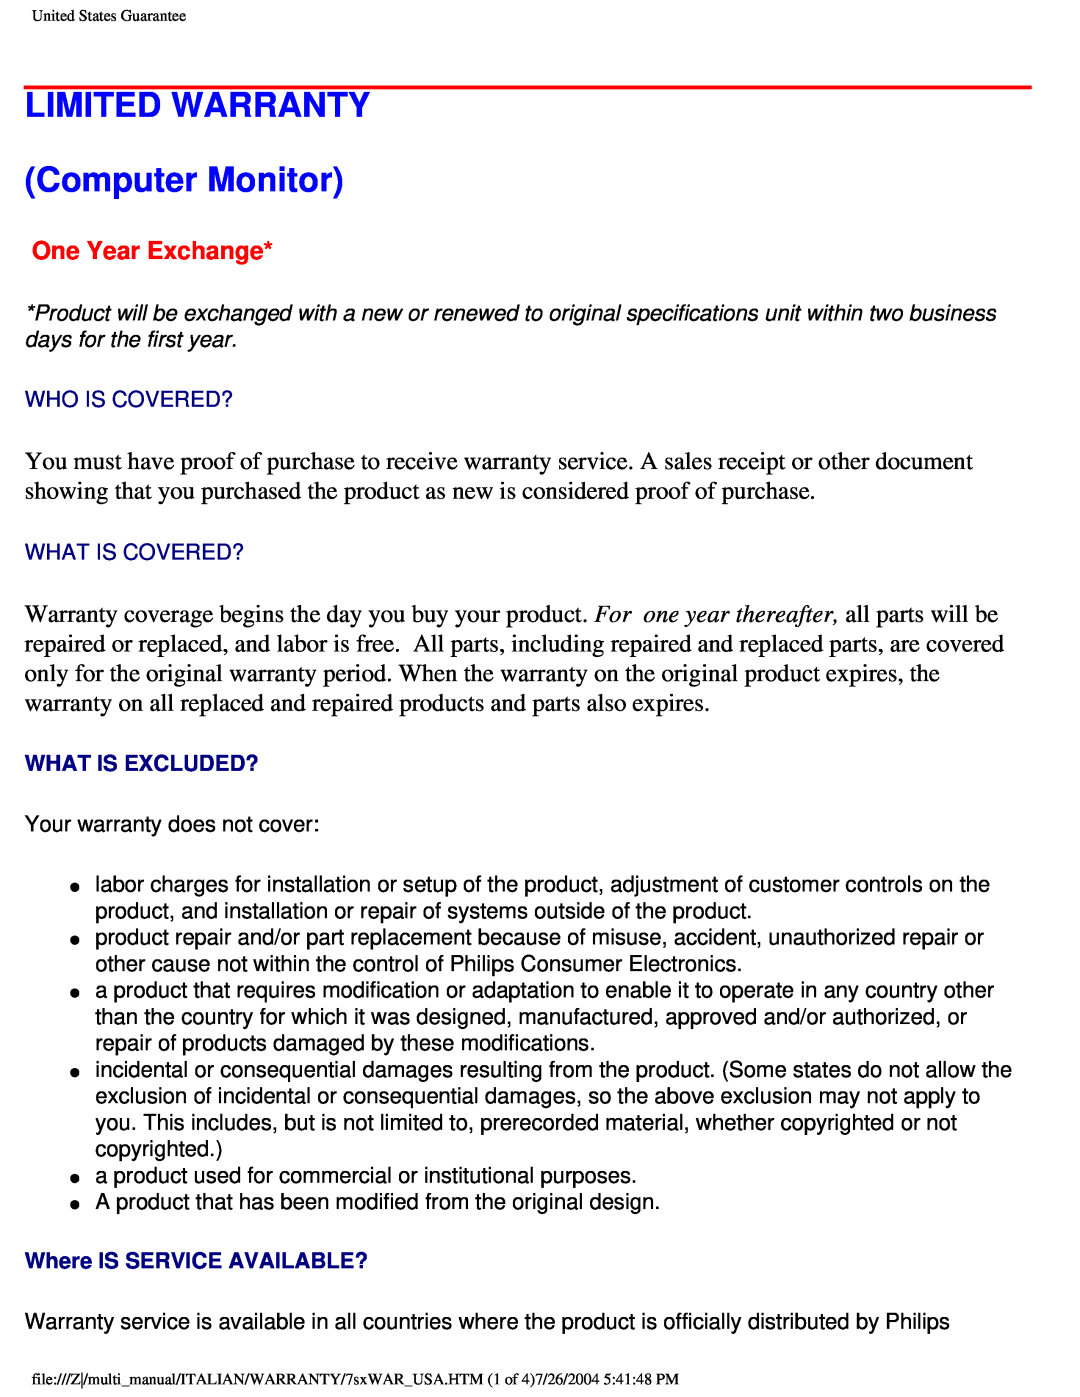 Philips 201B user manual LIMITED WARRANTY Computer Monitor, One Year Exchange 